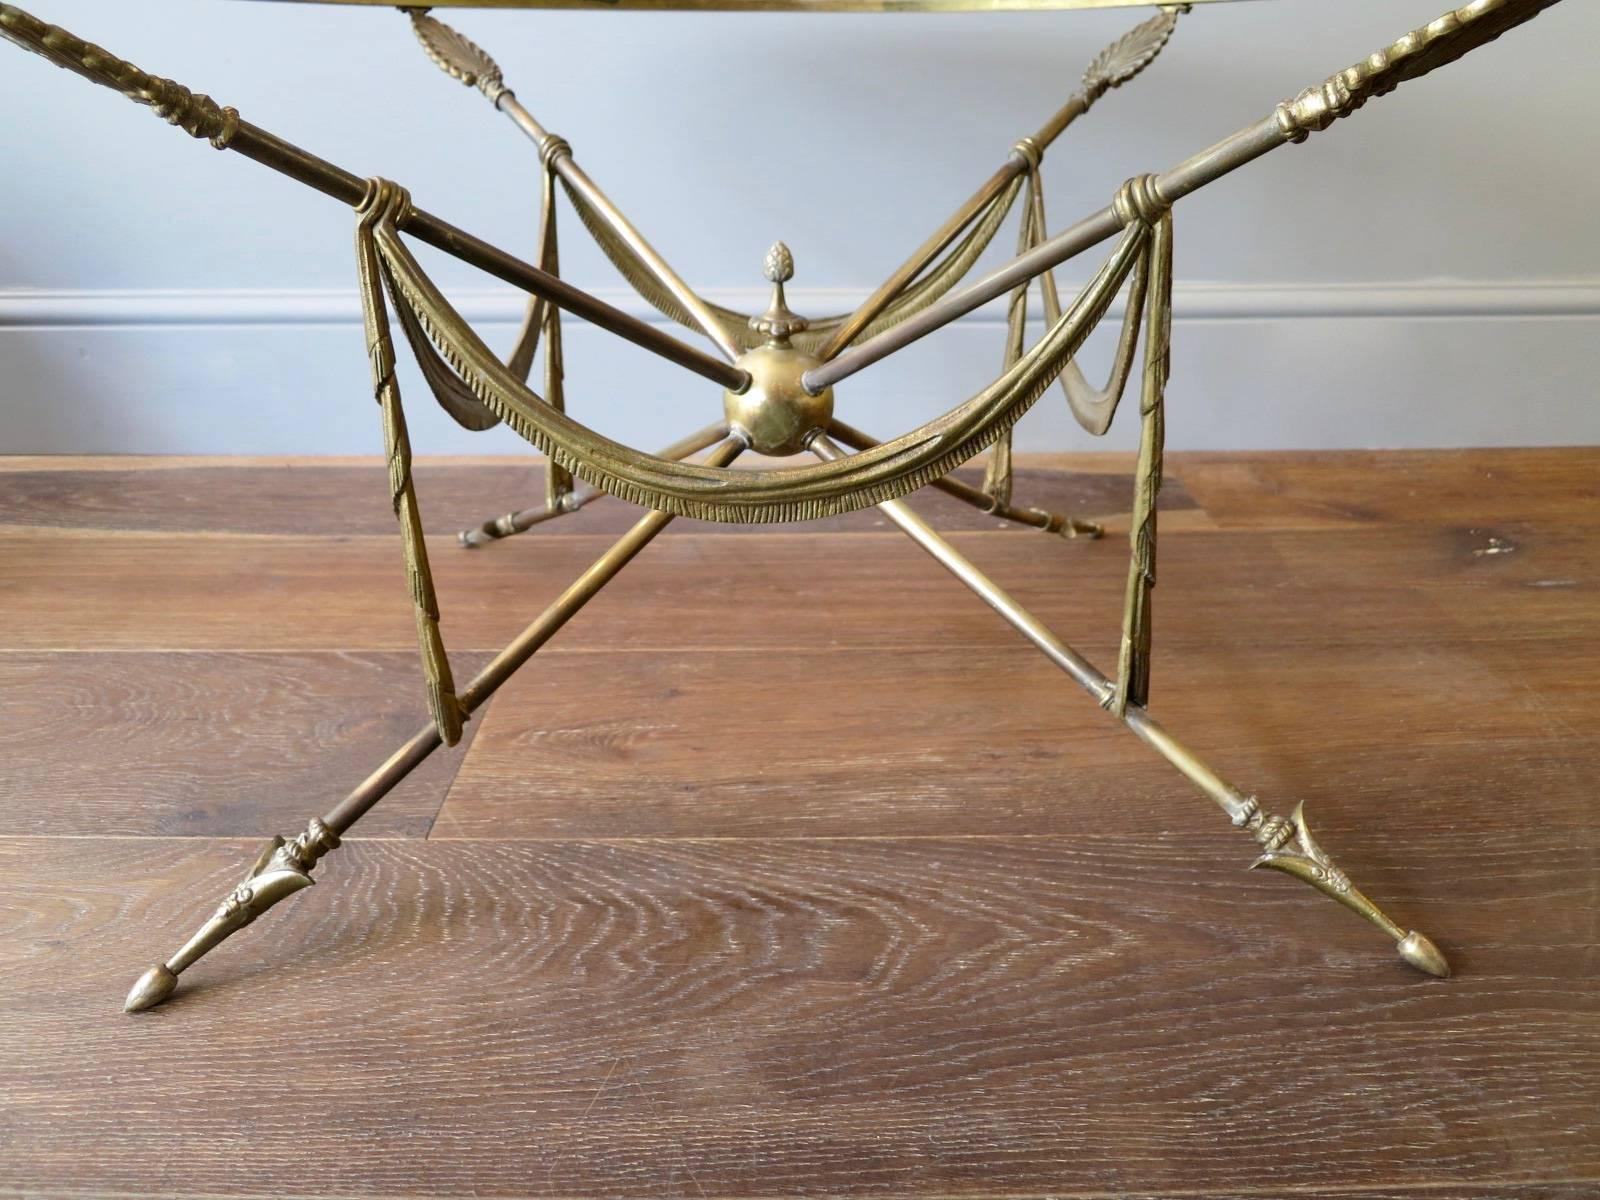 A circular cocktail table, attributed to Maison Jansen. Designed in the neoclassical style from the mid-20th century. The central sphere supporting the legs with arrow dart feet and feather supports at top. The drapery hanging from the supports.